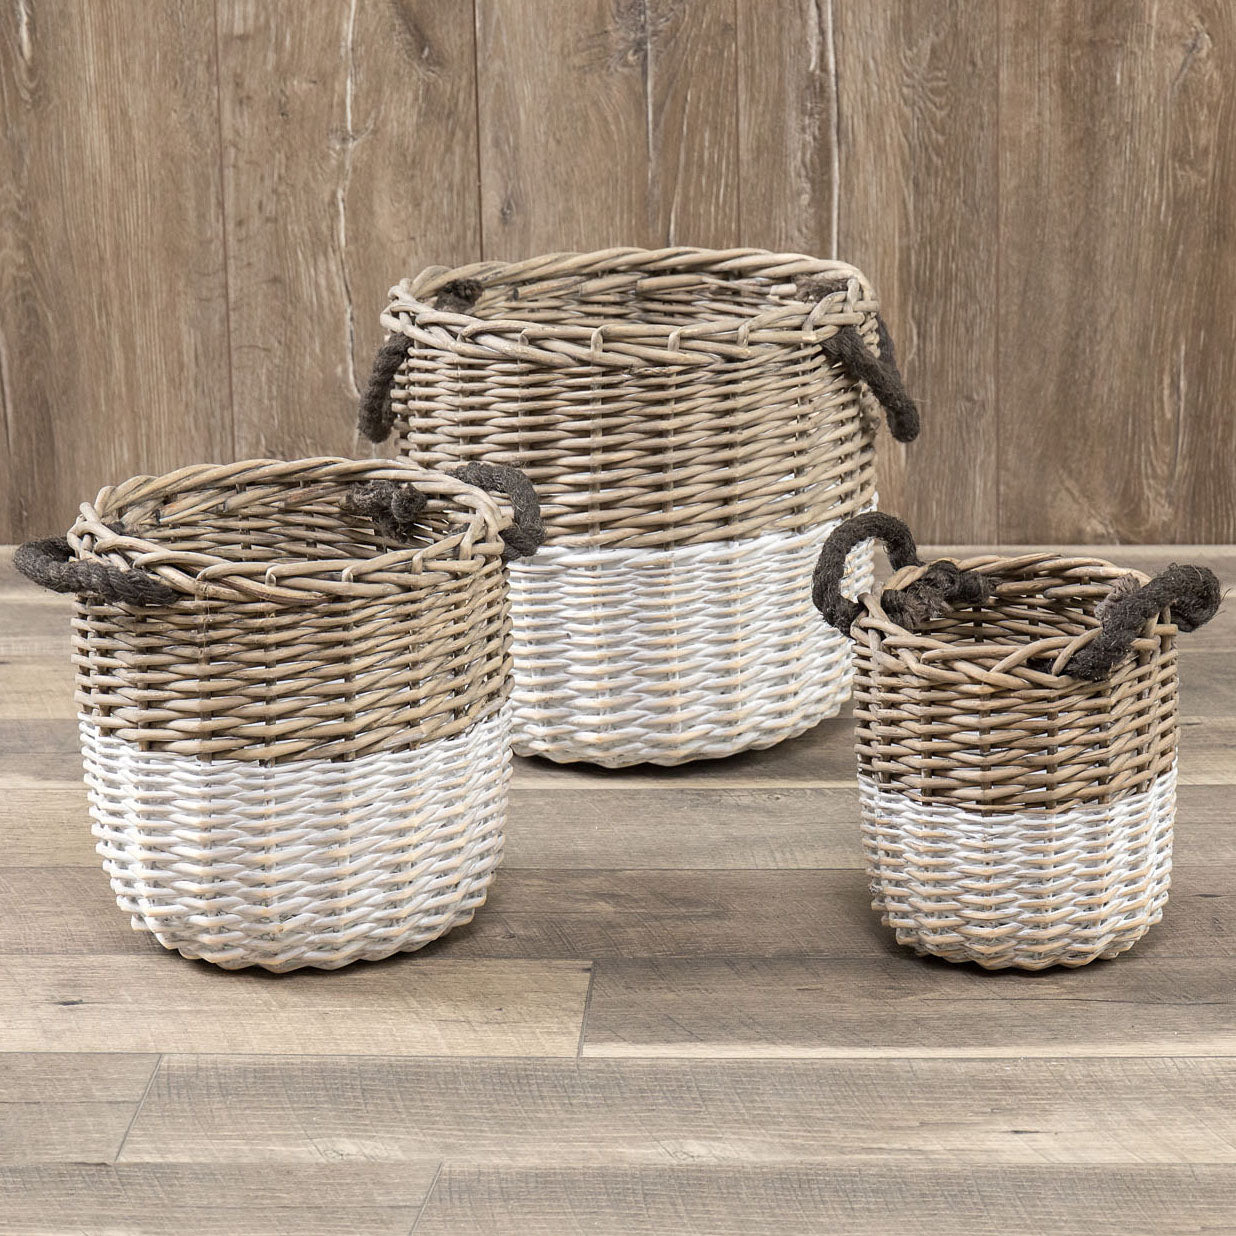 Set of 3 Wicker Farmhouse Baskets with White Bottoms and rope handles from One Cottage Way Coastal Farmhouse Decor